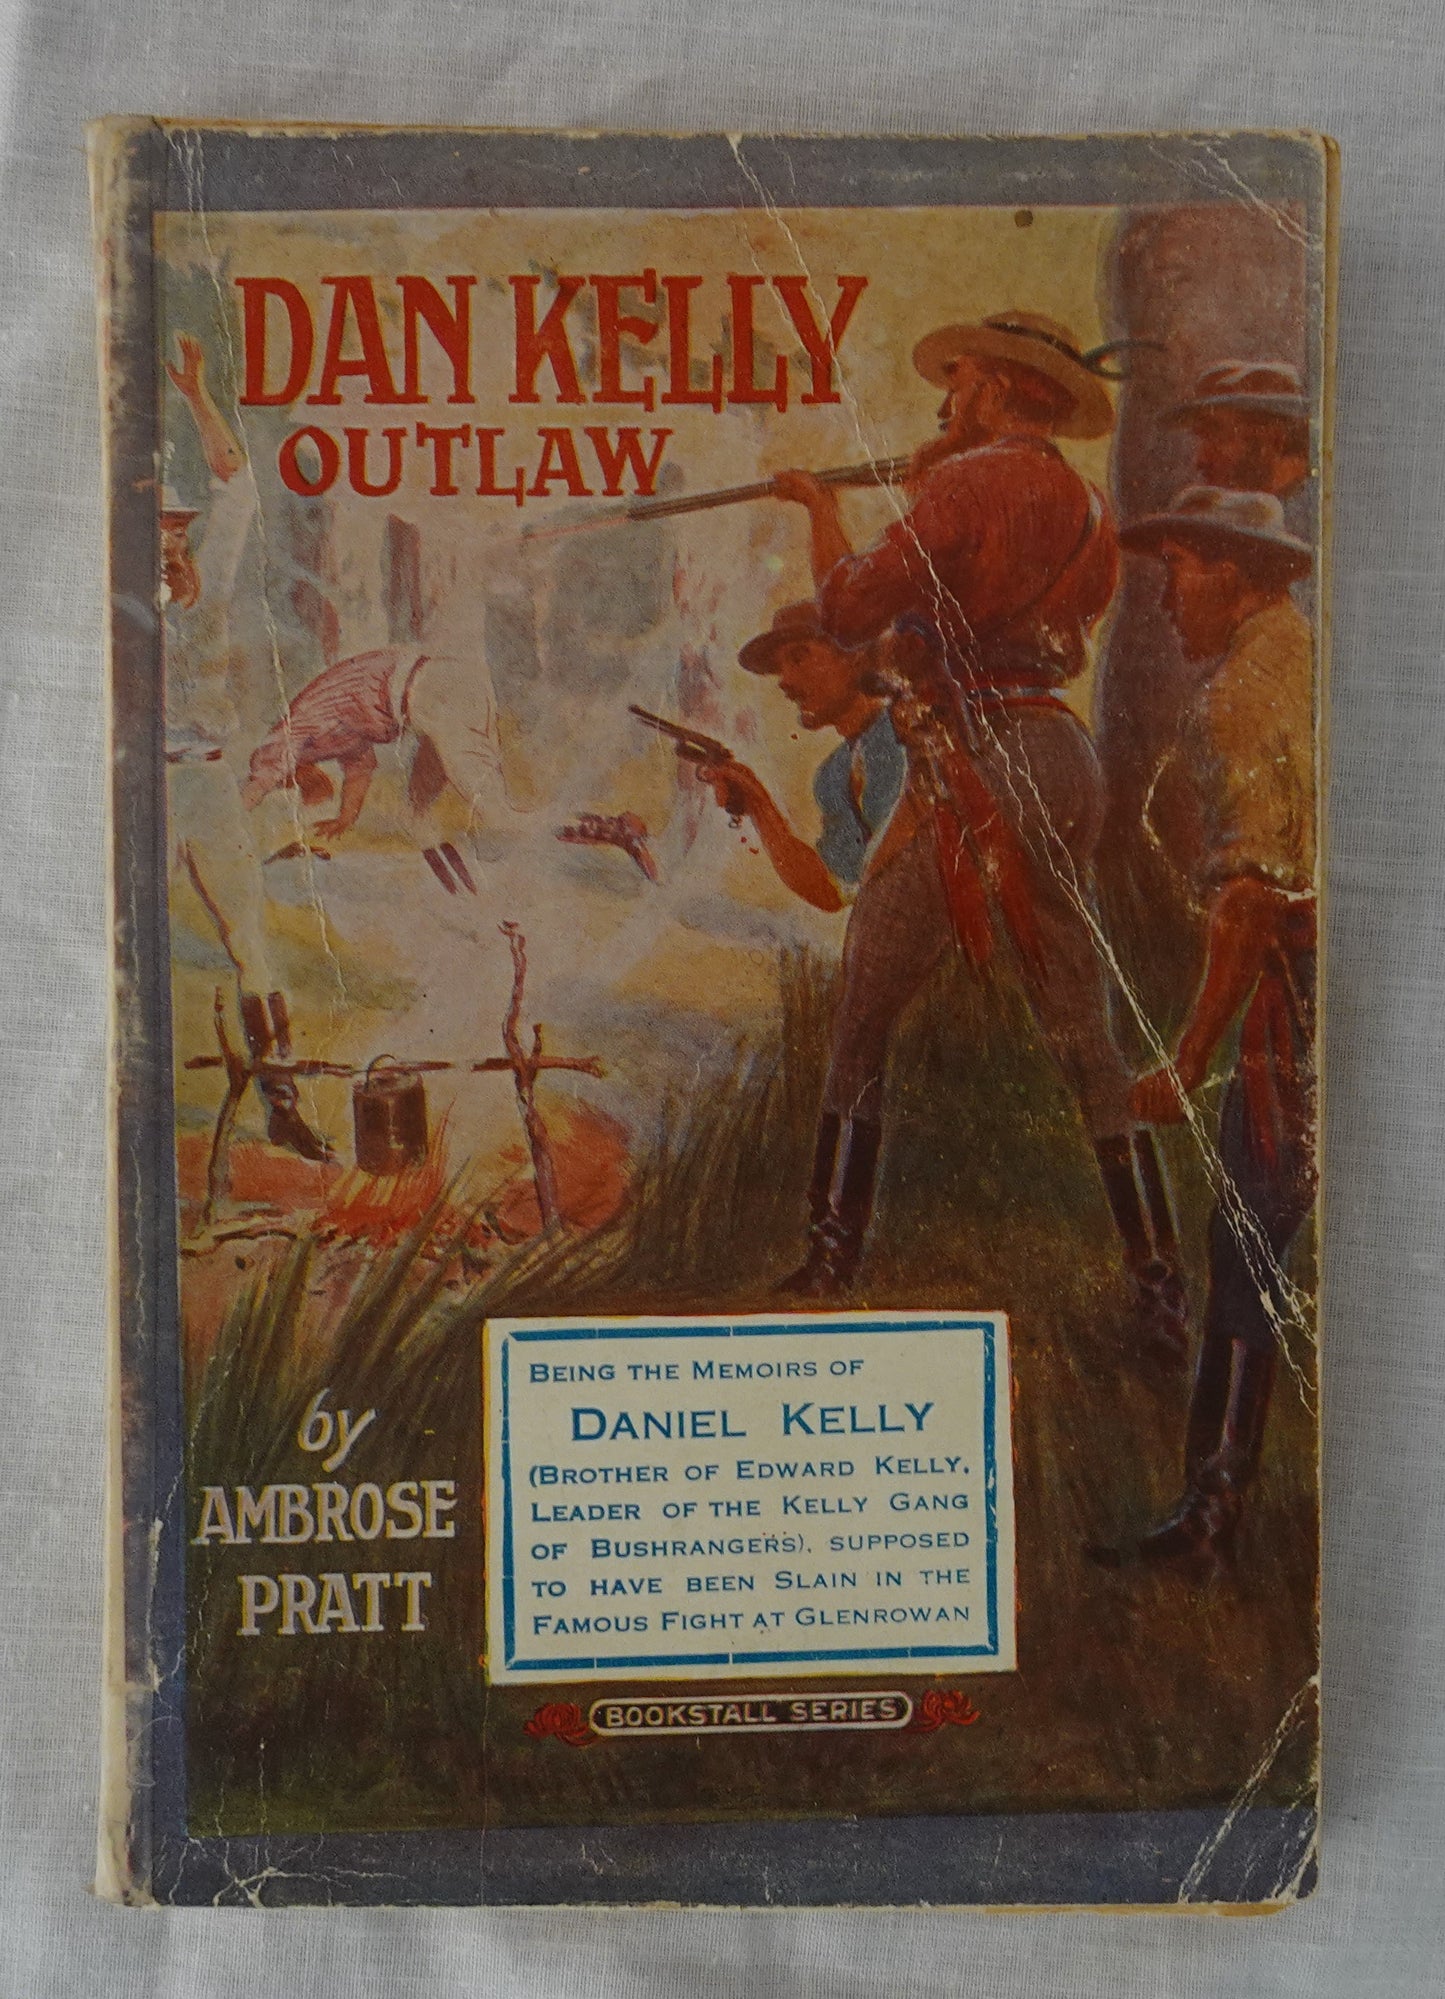 Dan Kelly  Outlaw  The Memoirs of Daniel Kelly (Brother of Edward Kelly, Leader of the Kelly Gang of Bushrangers), Supposed to Have Been Slain in the Famous Fight at Glenrowan  Edited by Ambrose Pratt